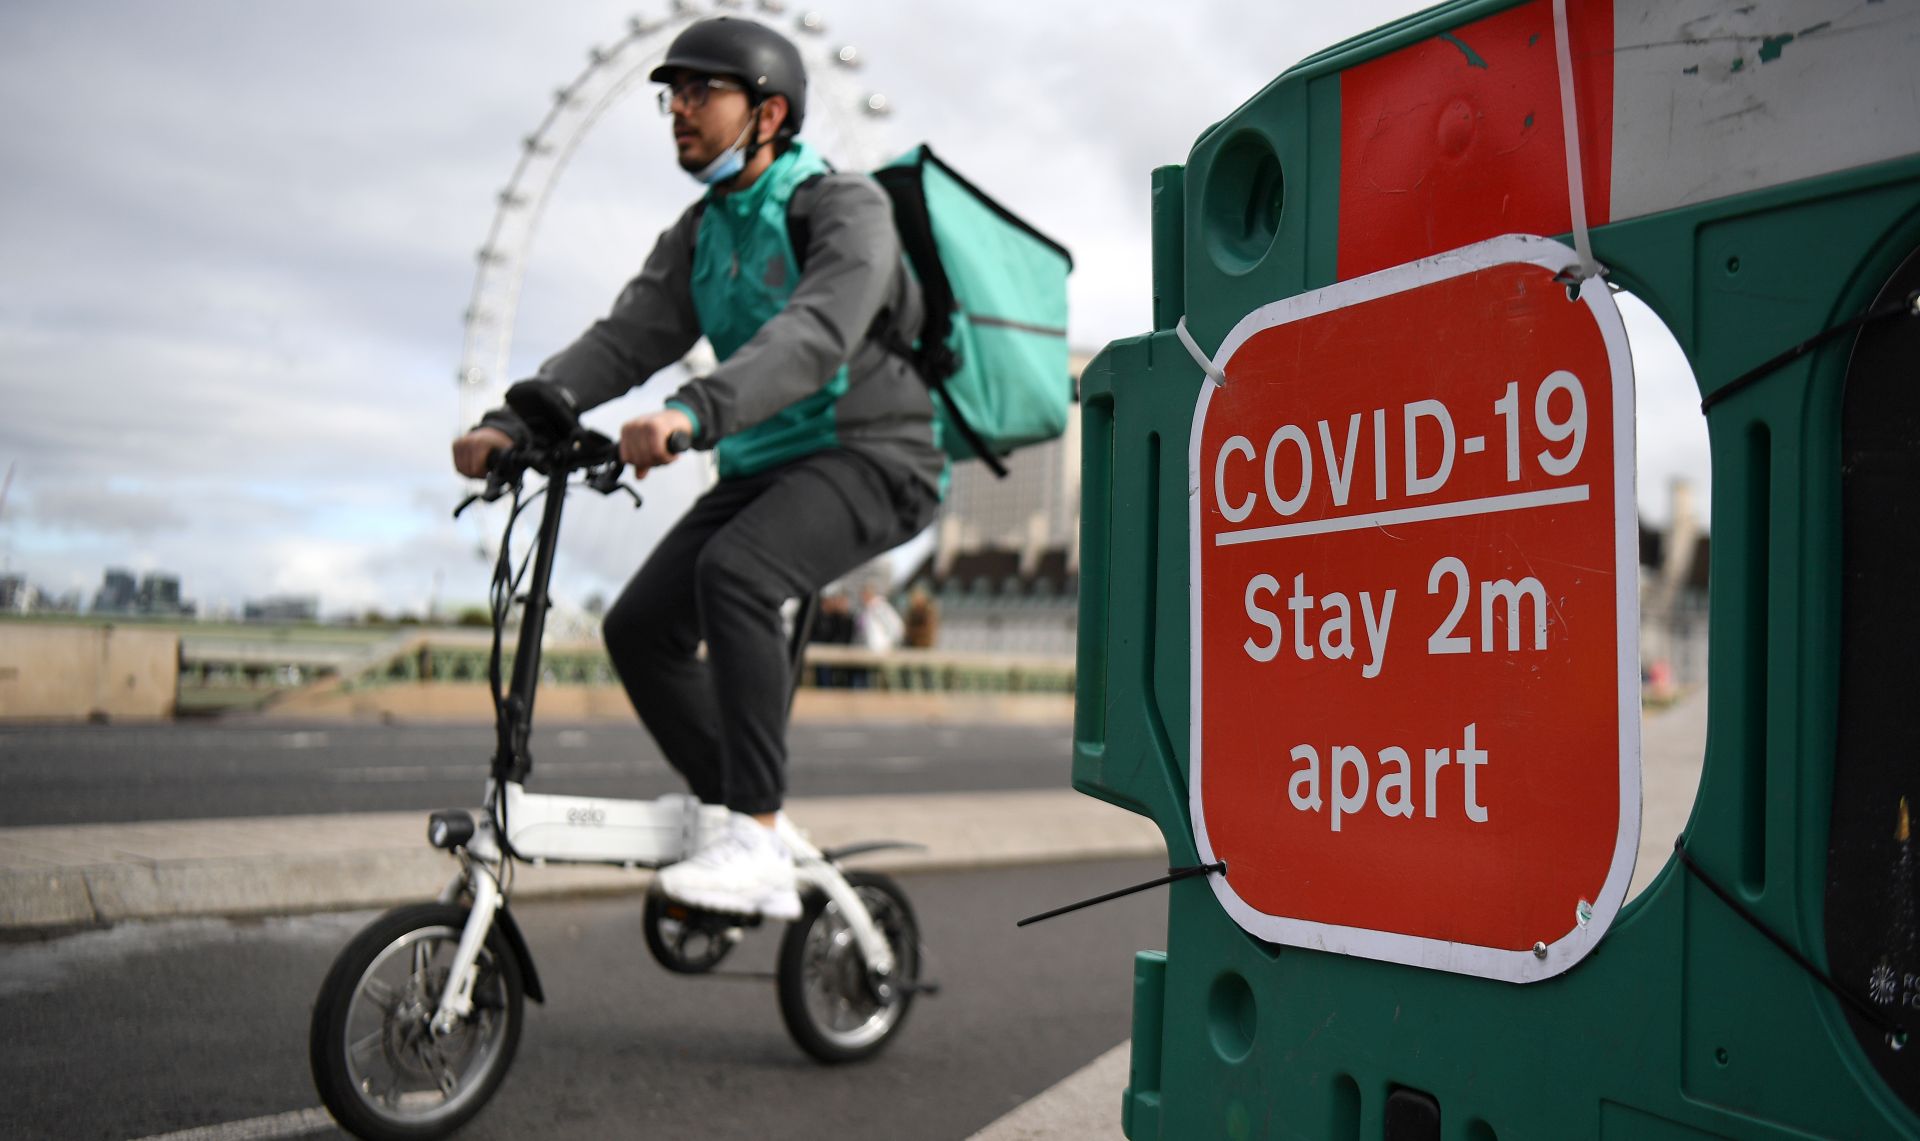 epa08746914 A food courier cycles over Westminster Bridge in London, Britain, 15 October 2020. According to news reports the UK government is set to impose further restrictions on London, as Covid -19 infections continue to rise.  According to recent data from the Office for National Statistics (ONS) Covid-19 deaths in England have risen four fold over the last month.  EPA/ANDY RAIN